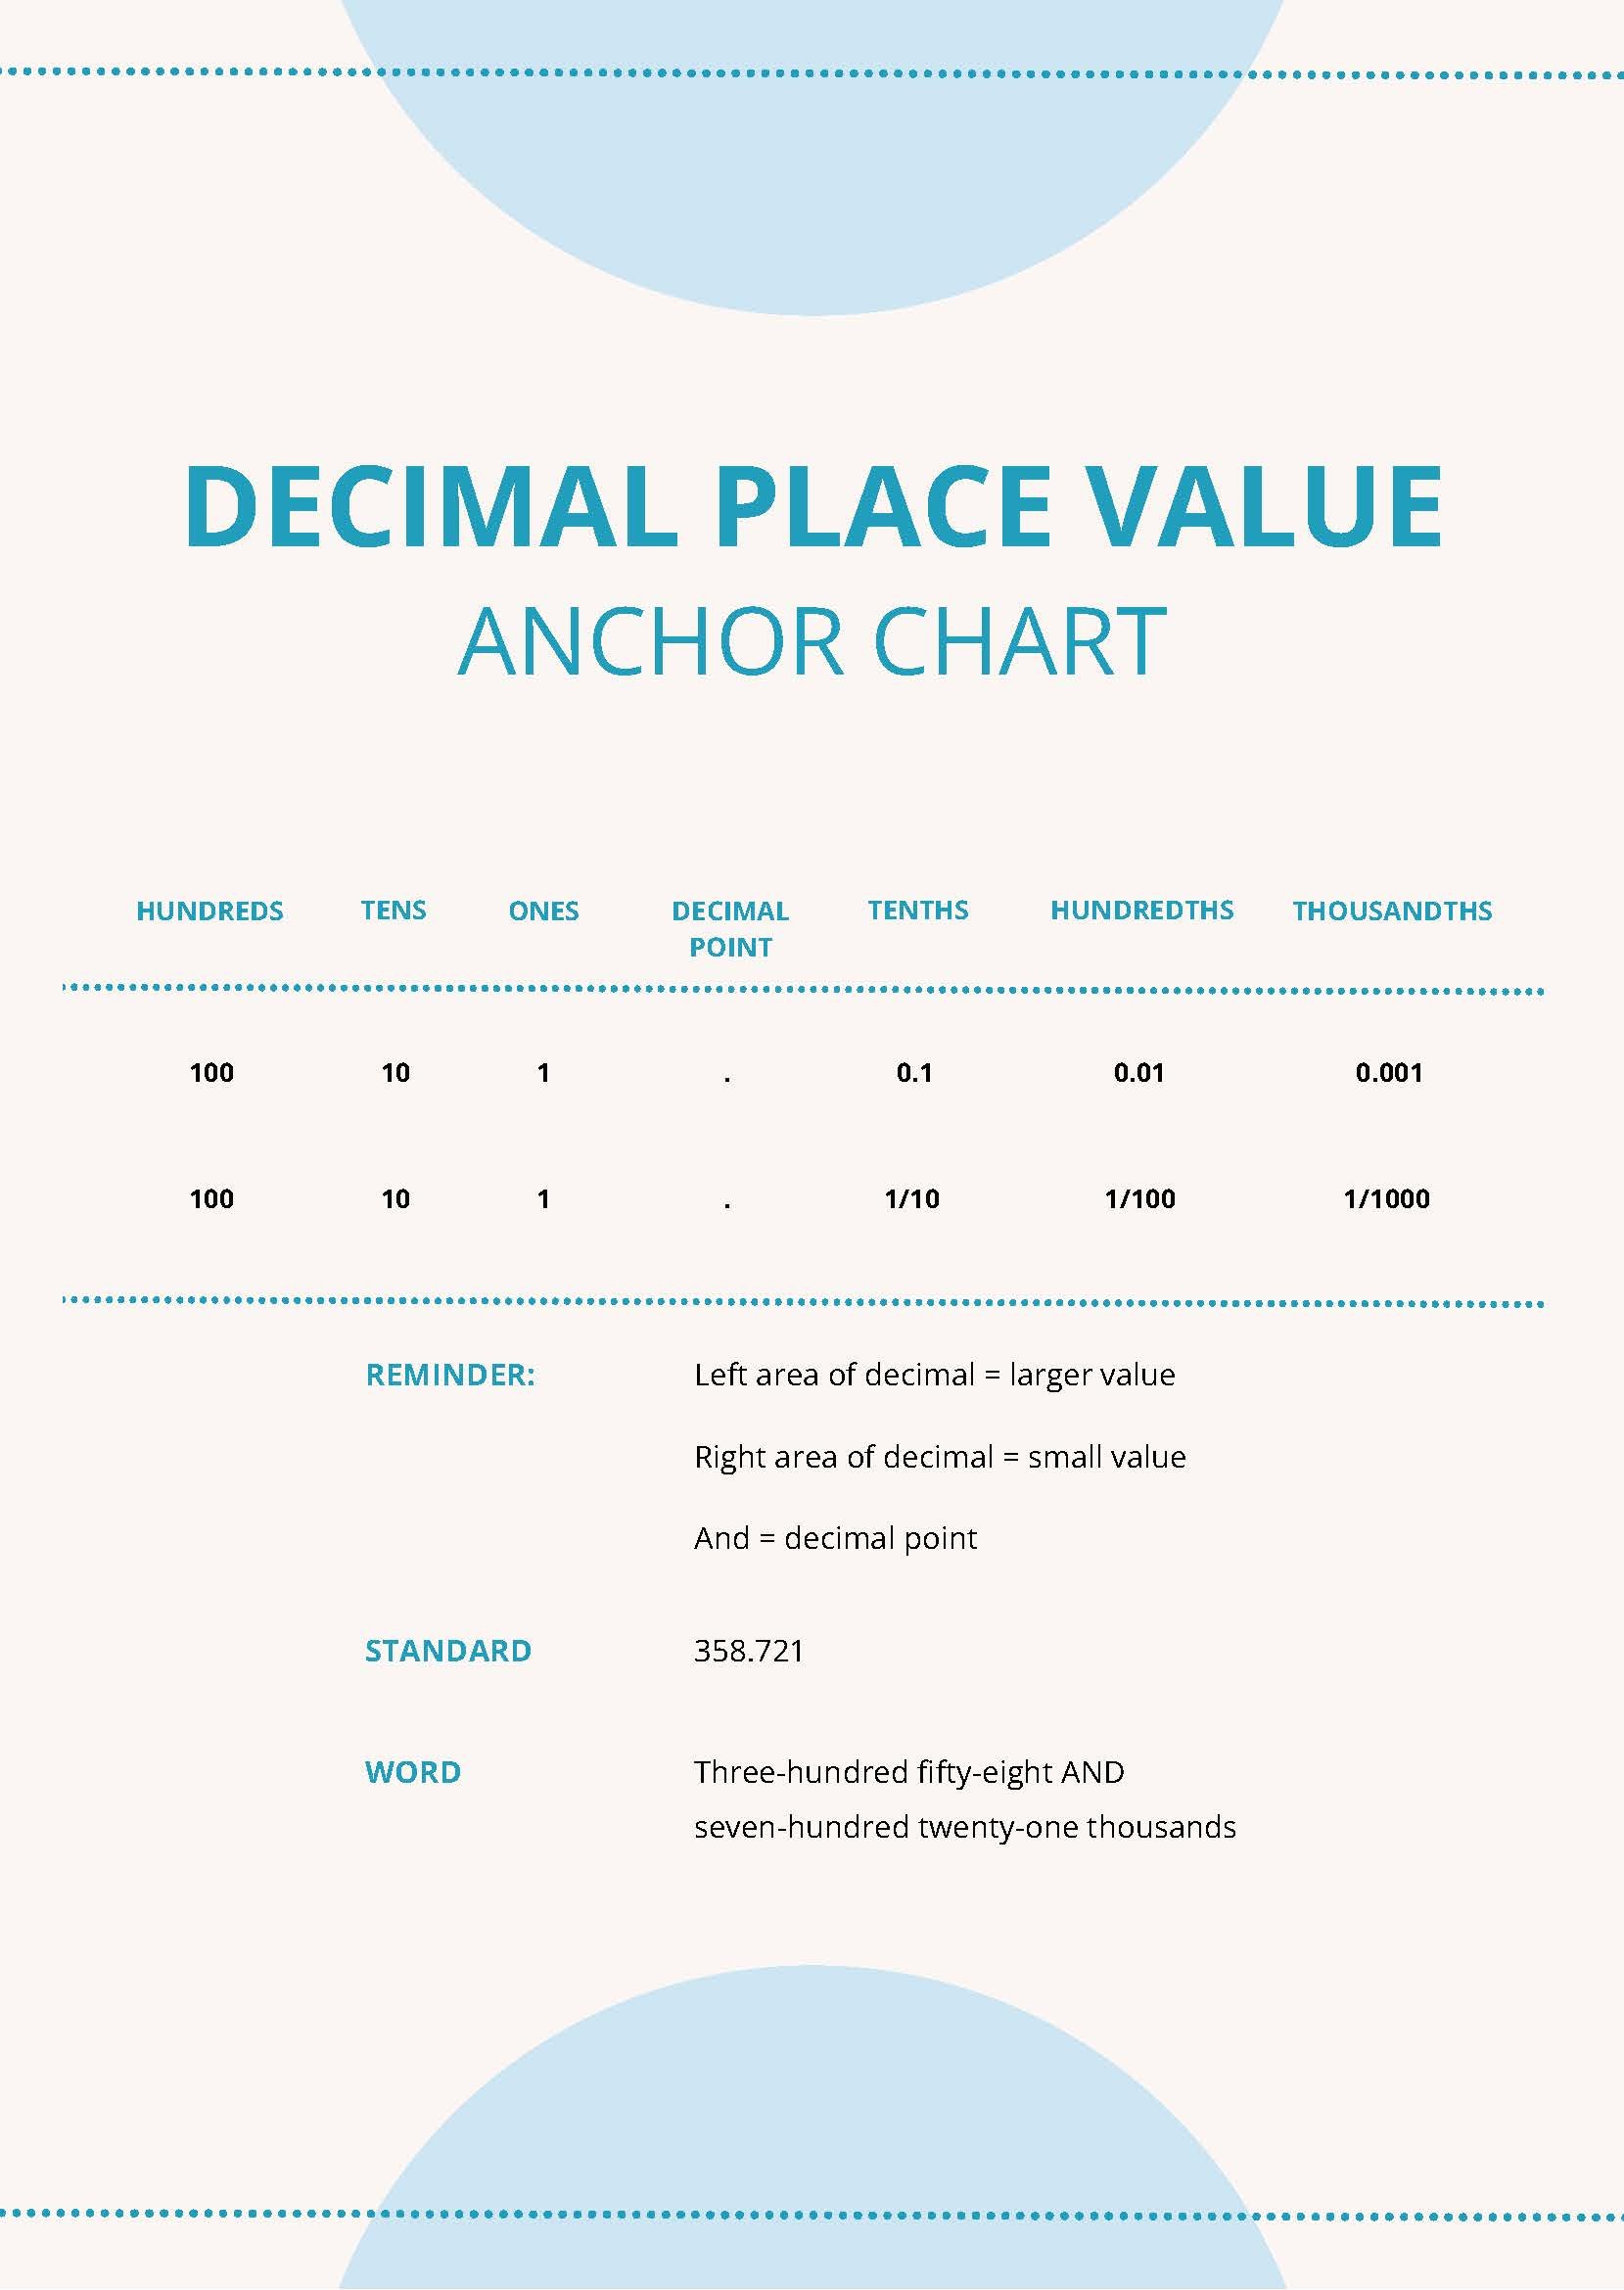 decimal-place-value-anchor-chart-in-pdf-download-template